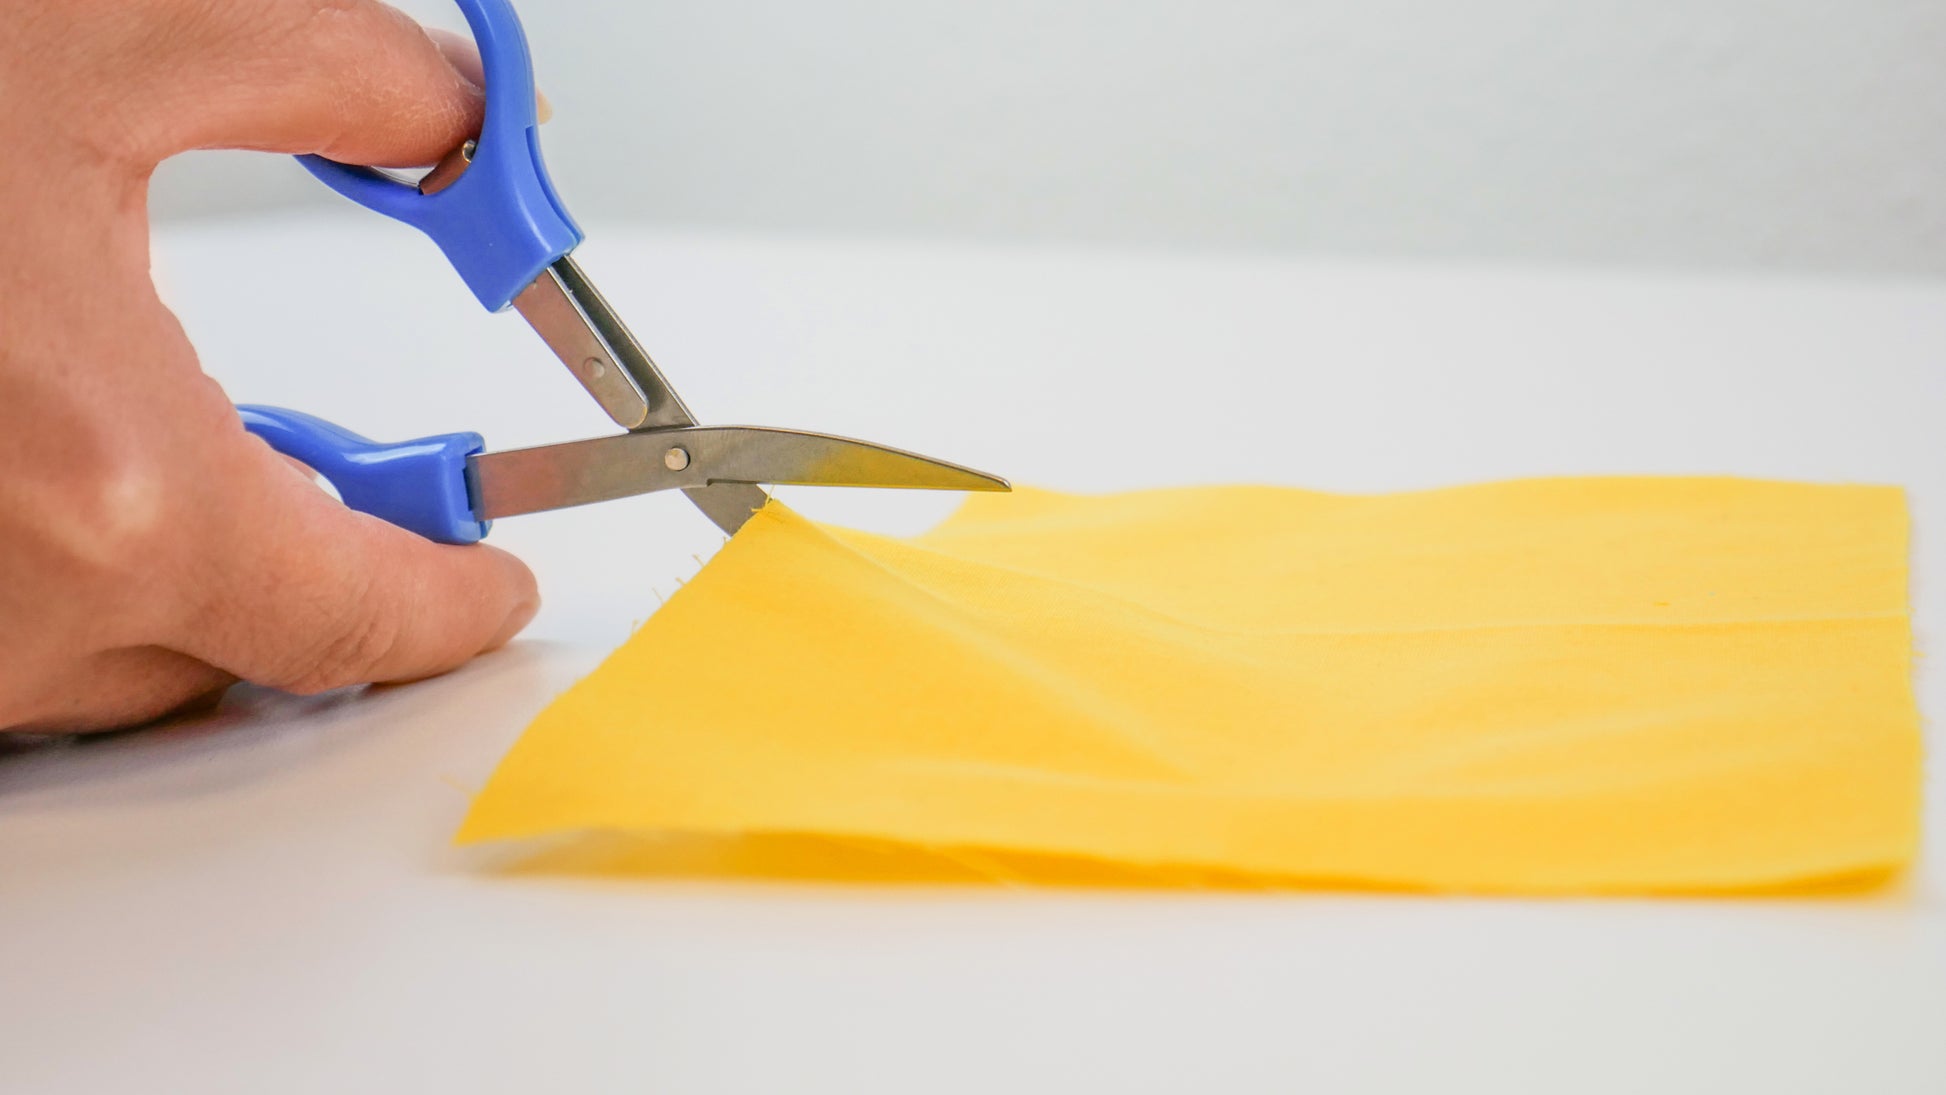 A zoomed-out shot of fingers using the blue collapsible scissors in unfolded form to cut a piece of yellow fabric.